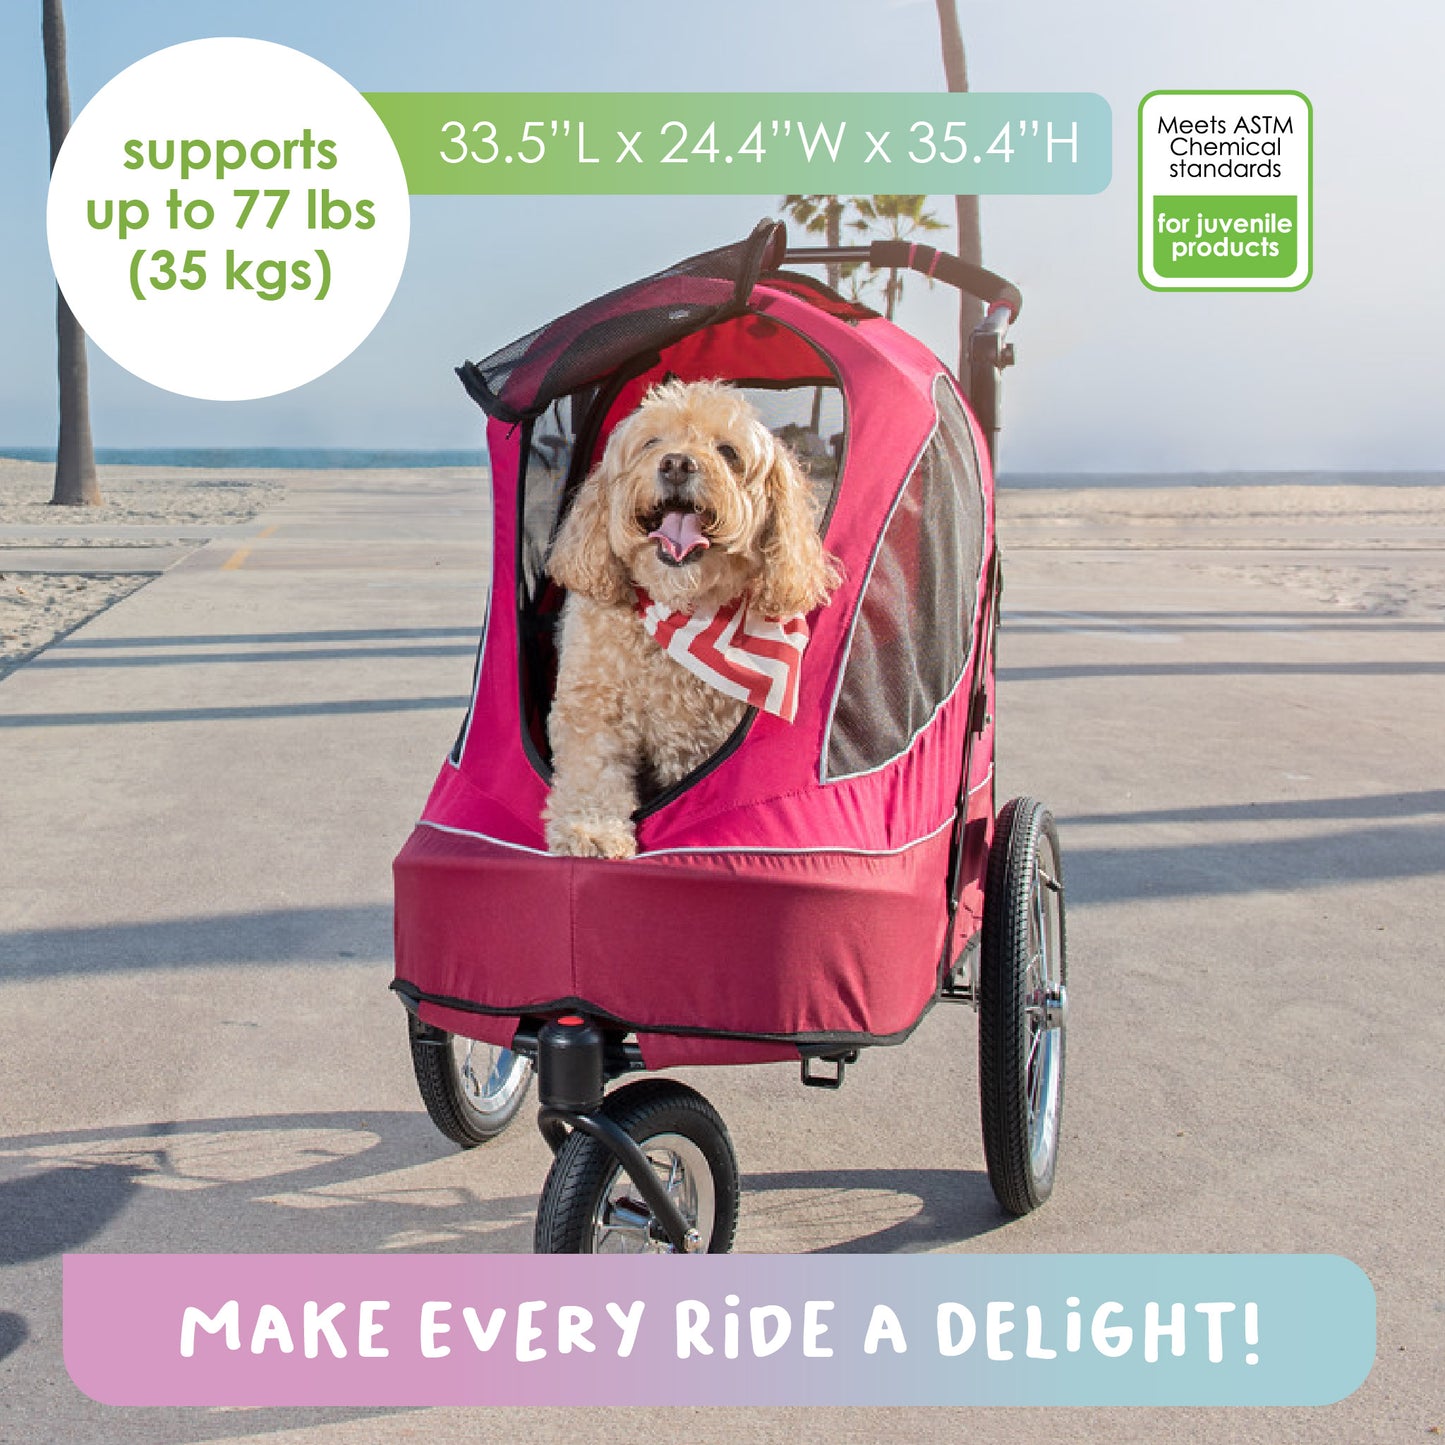 magenta pet jogger supports up to 77 LBS